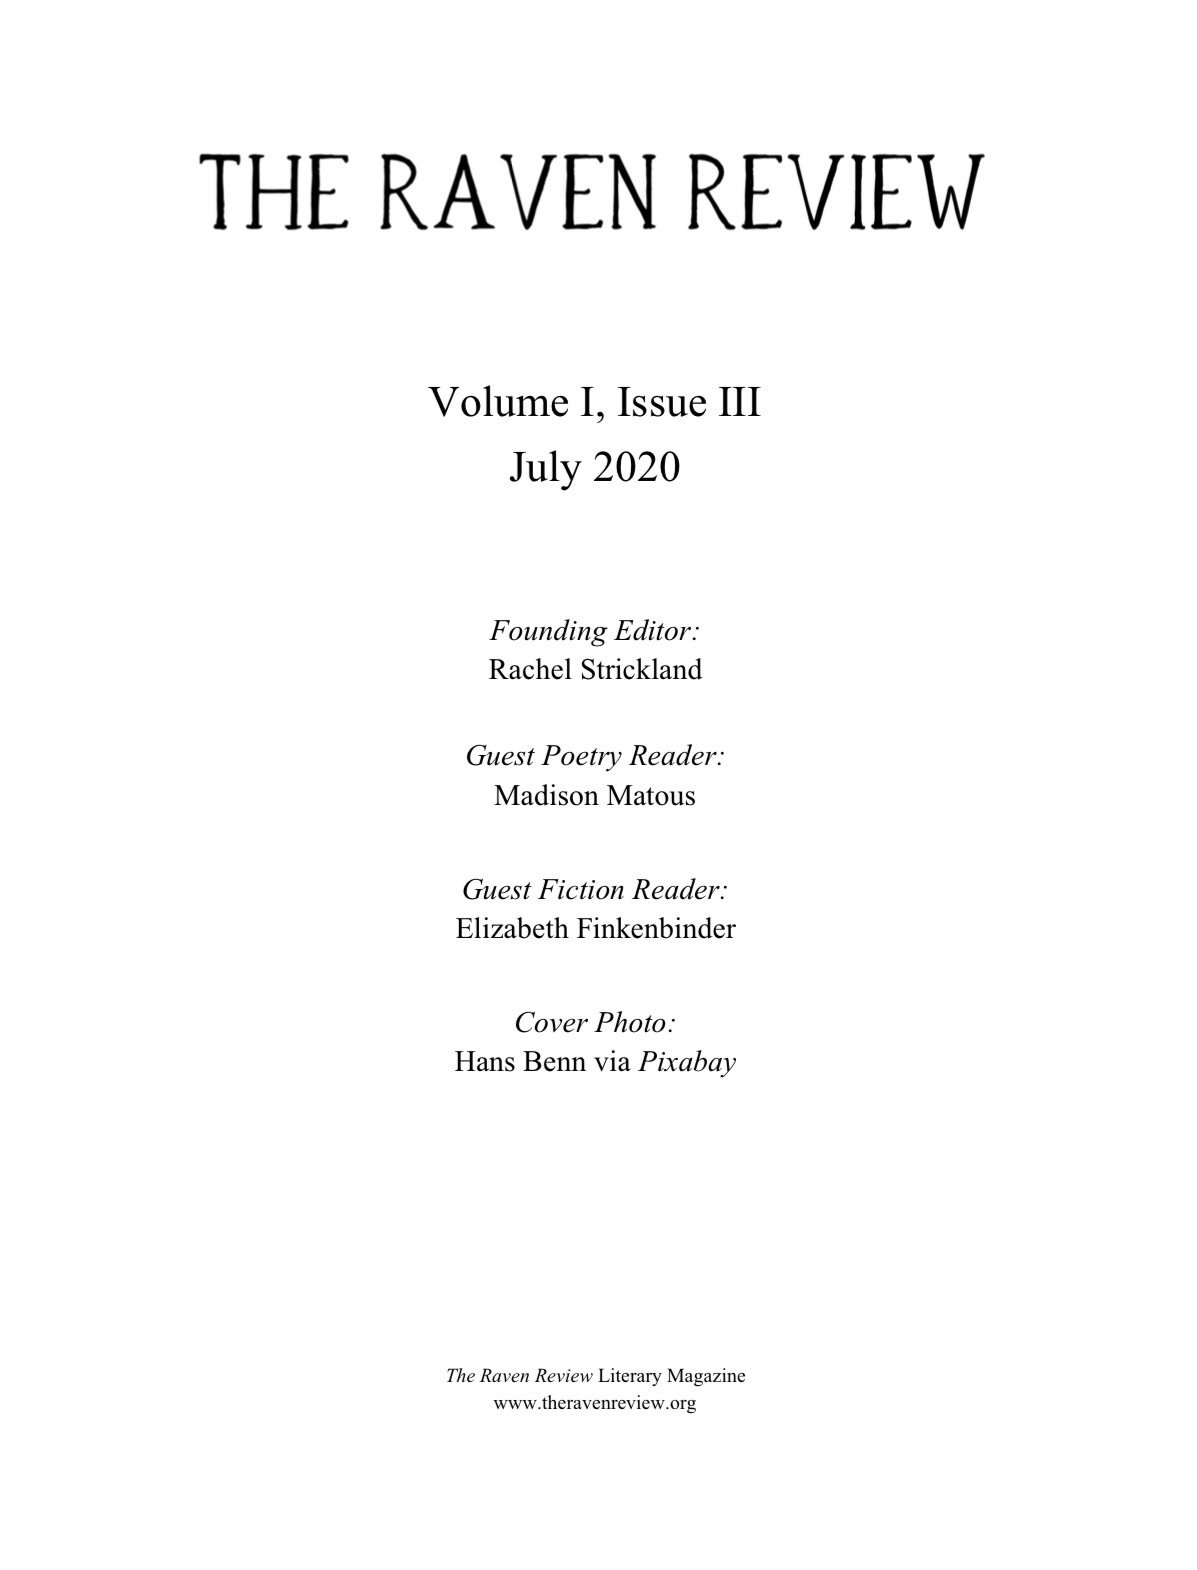 Raven Review July 2020 Info Page.JPG